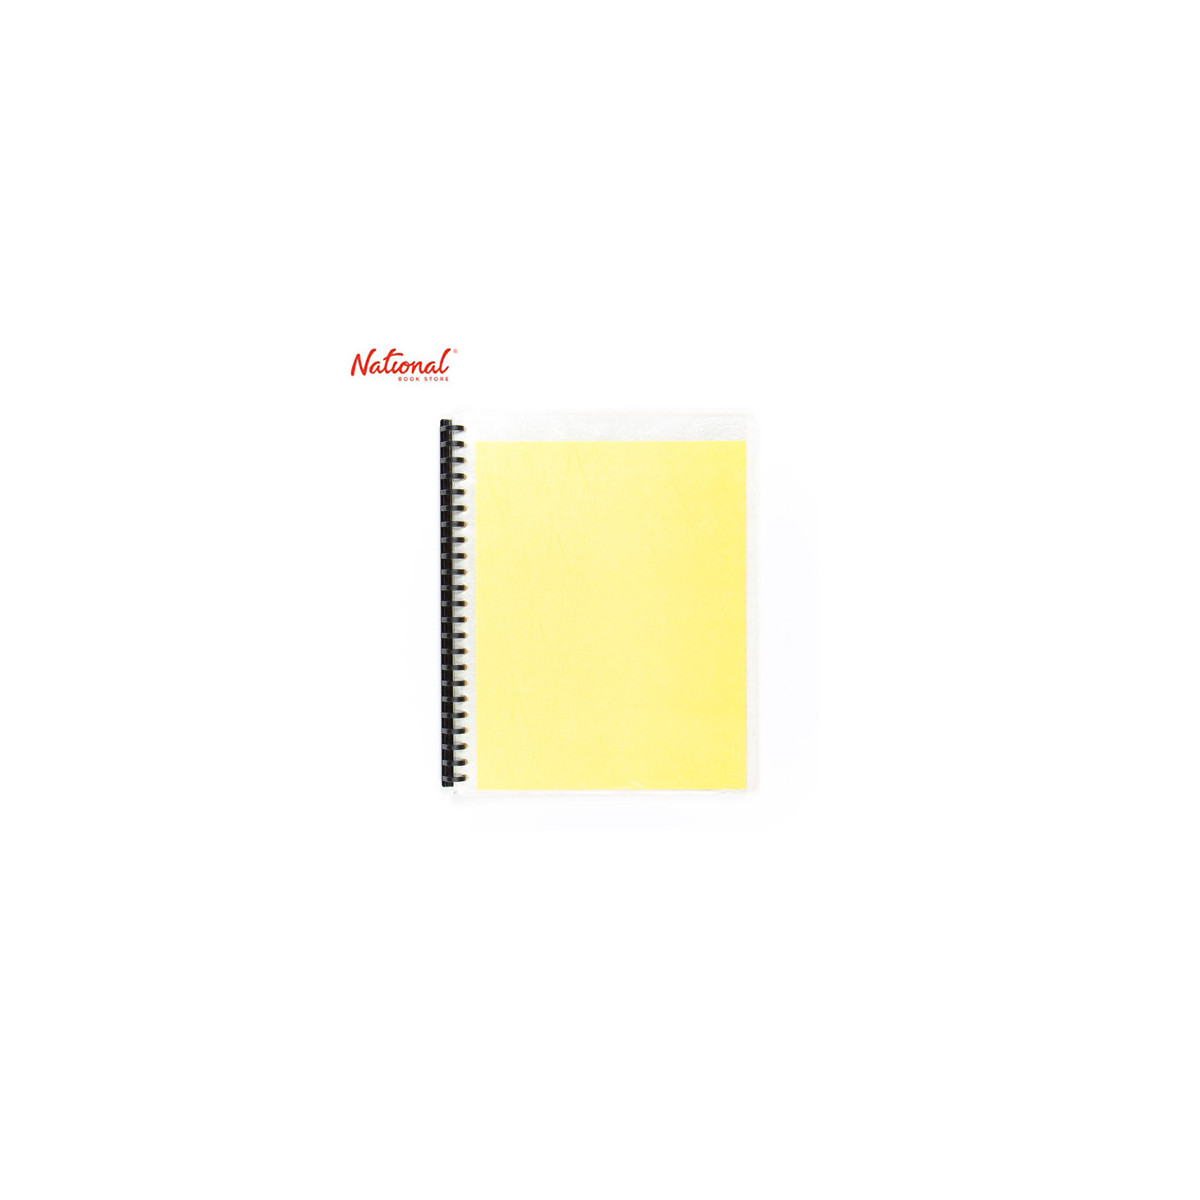 Seagull Clearbook Refillable 9923 Short 20Sheets White